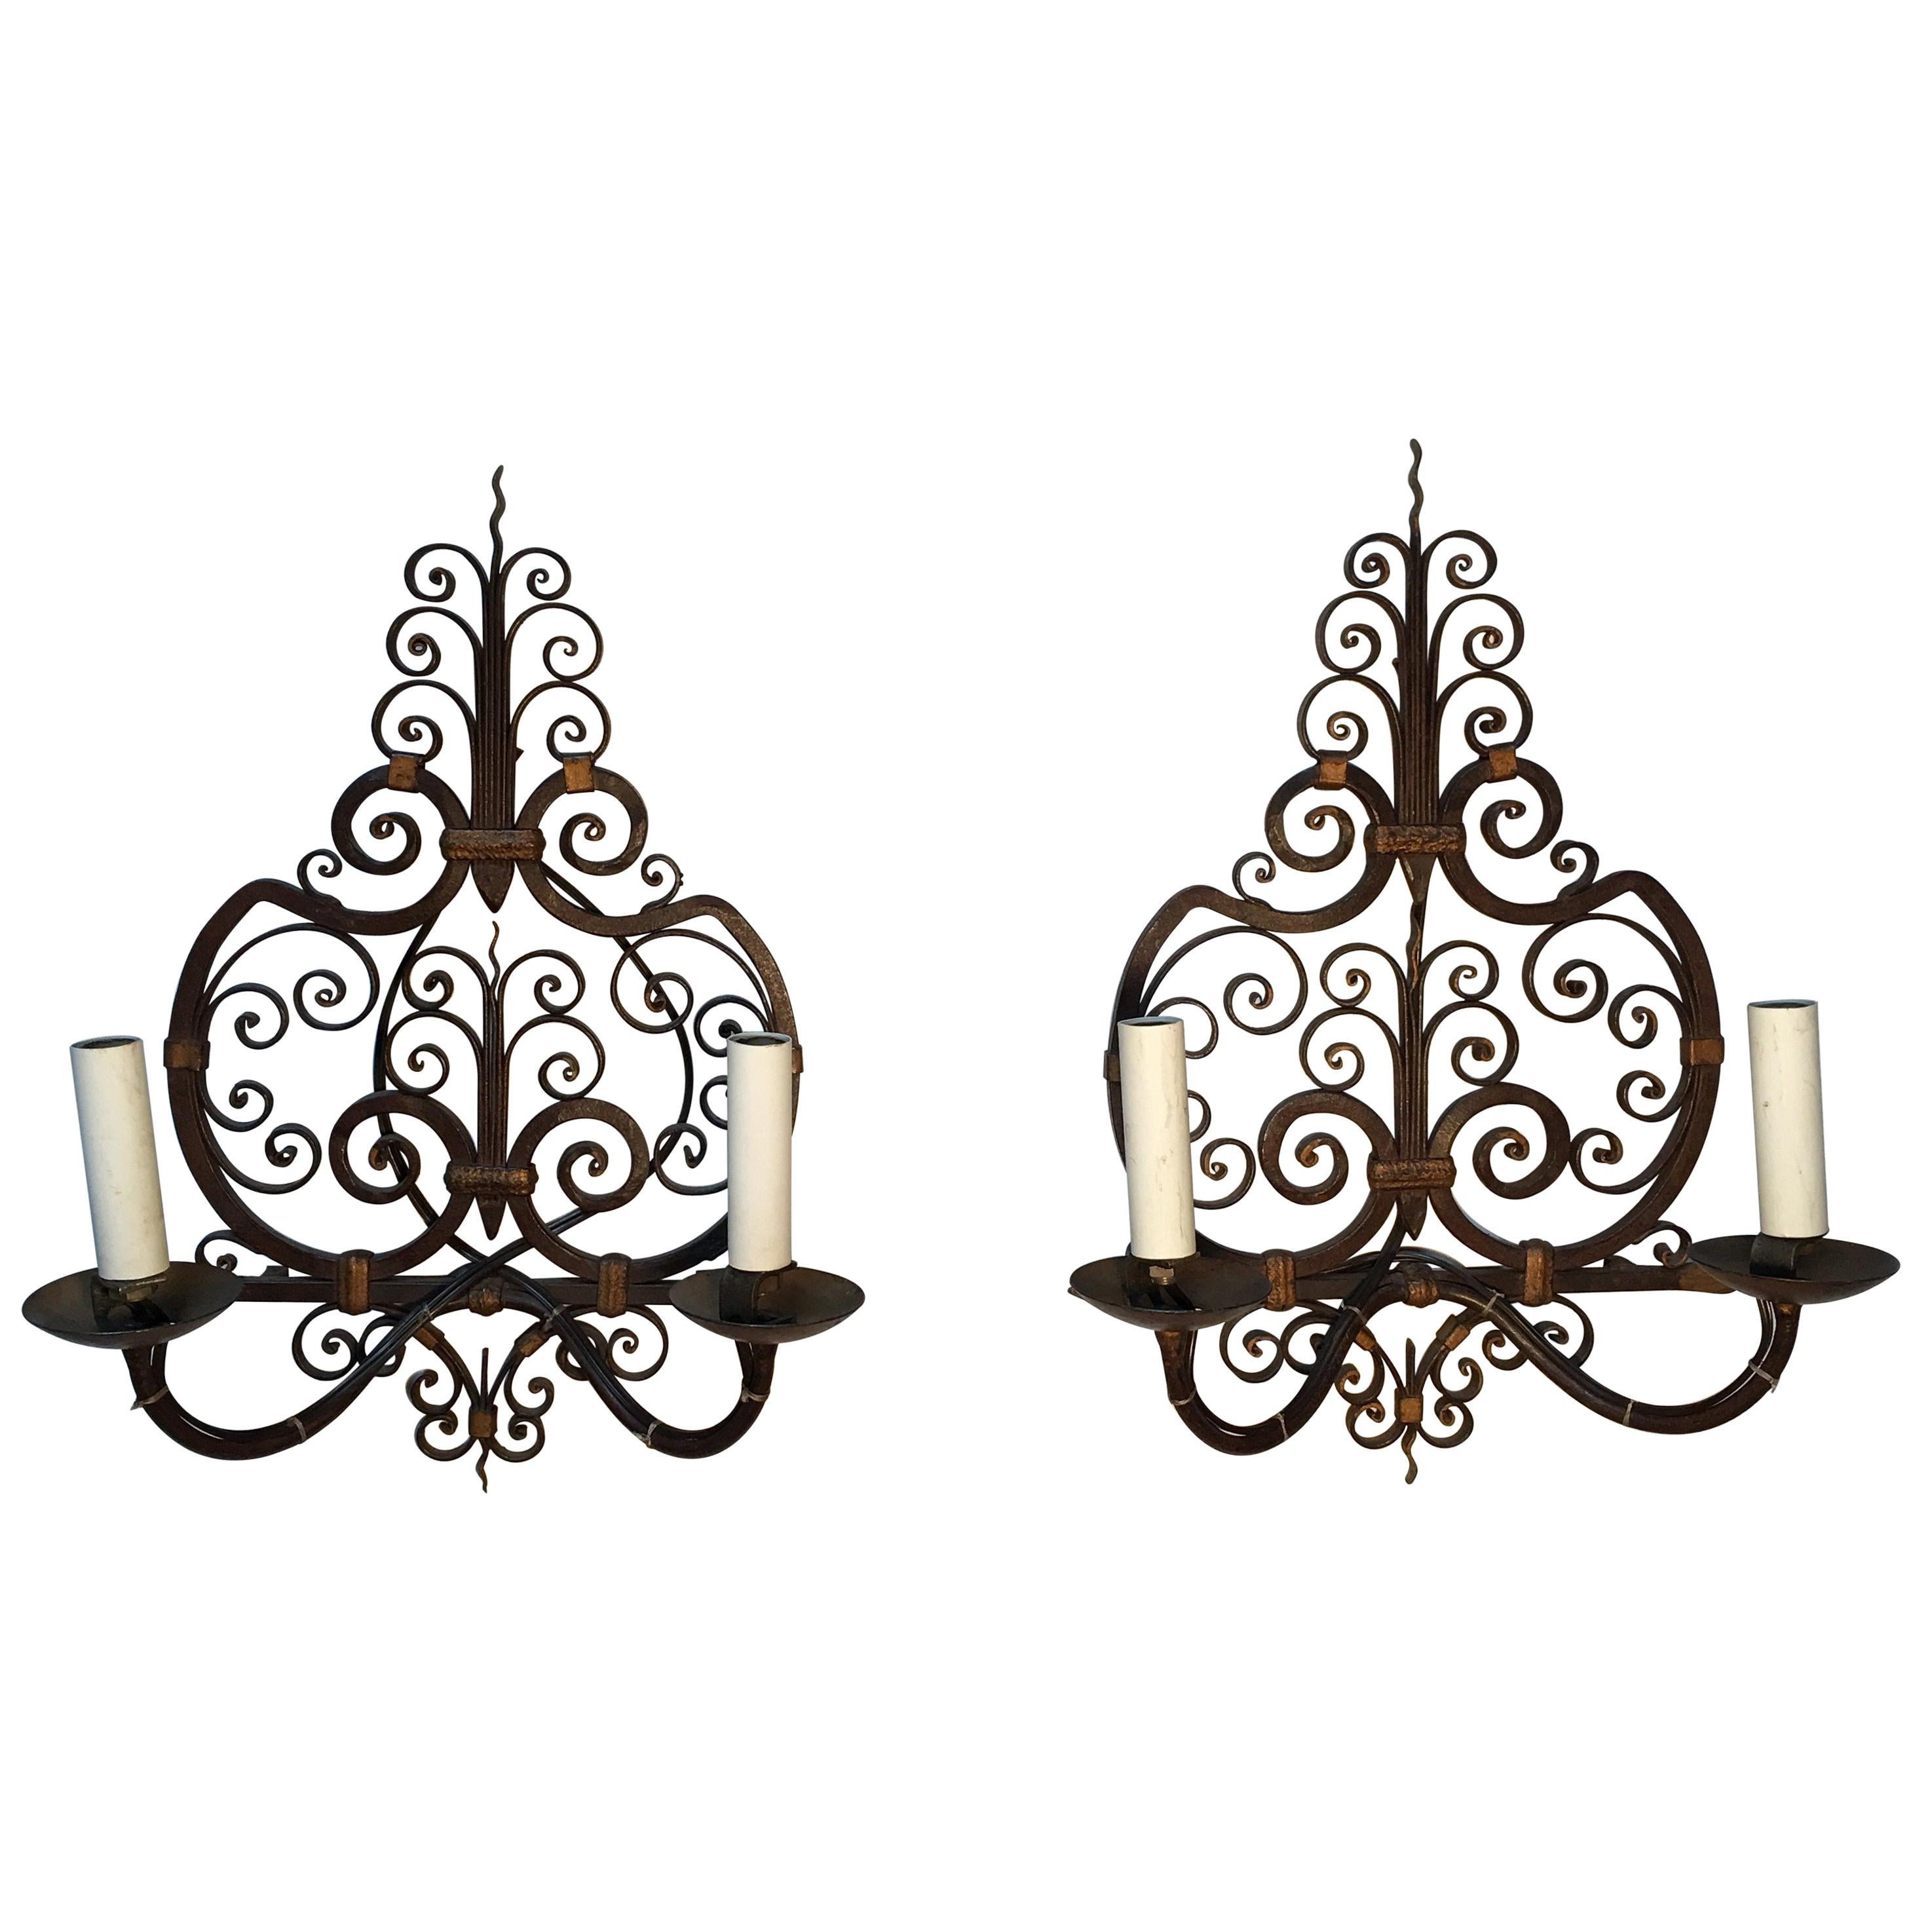 Pair of French Forged Iron Wall Sconces